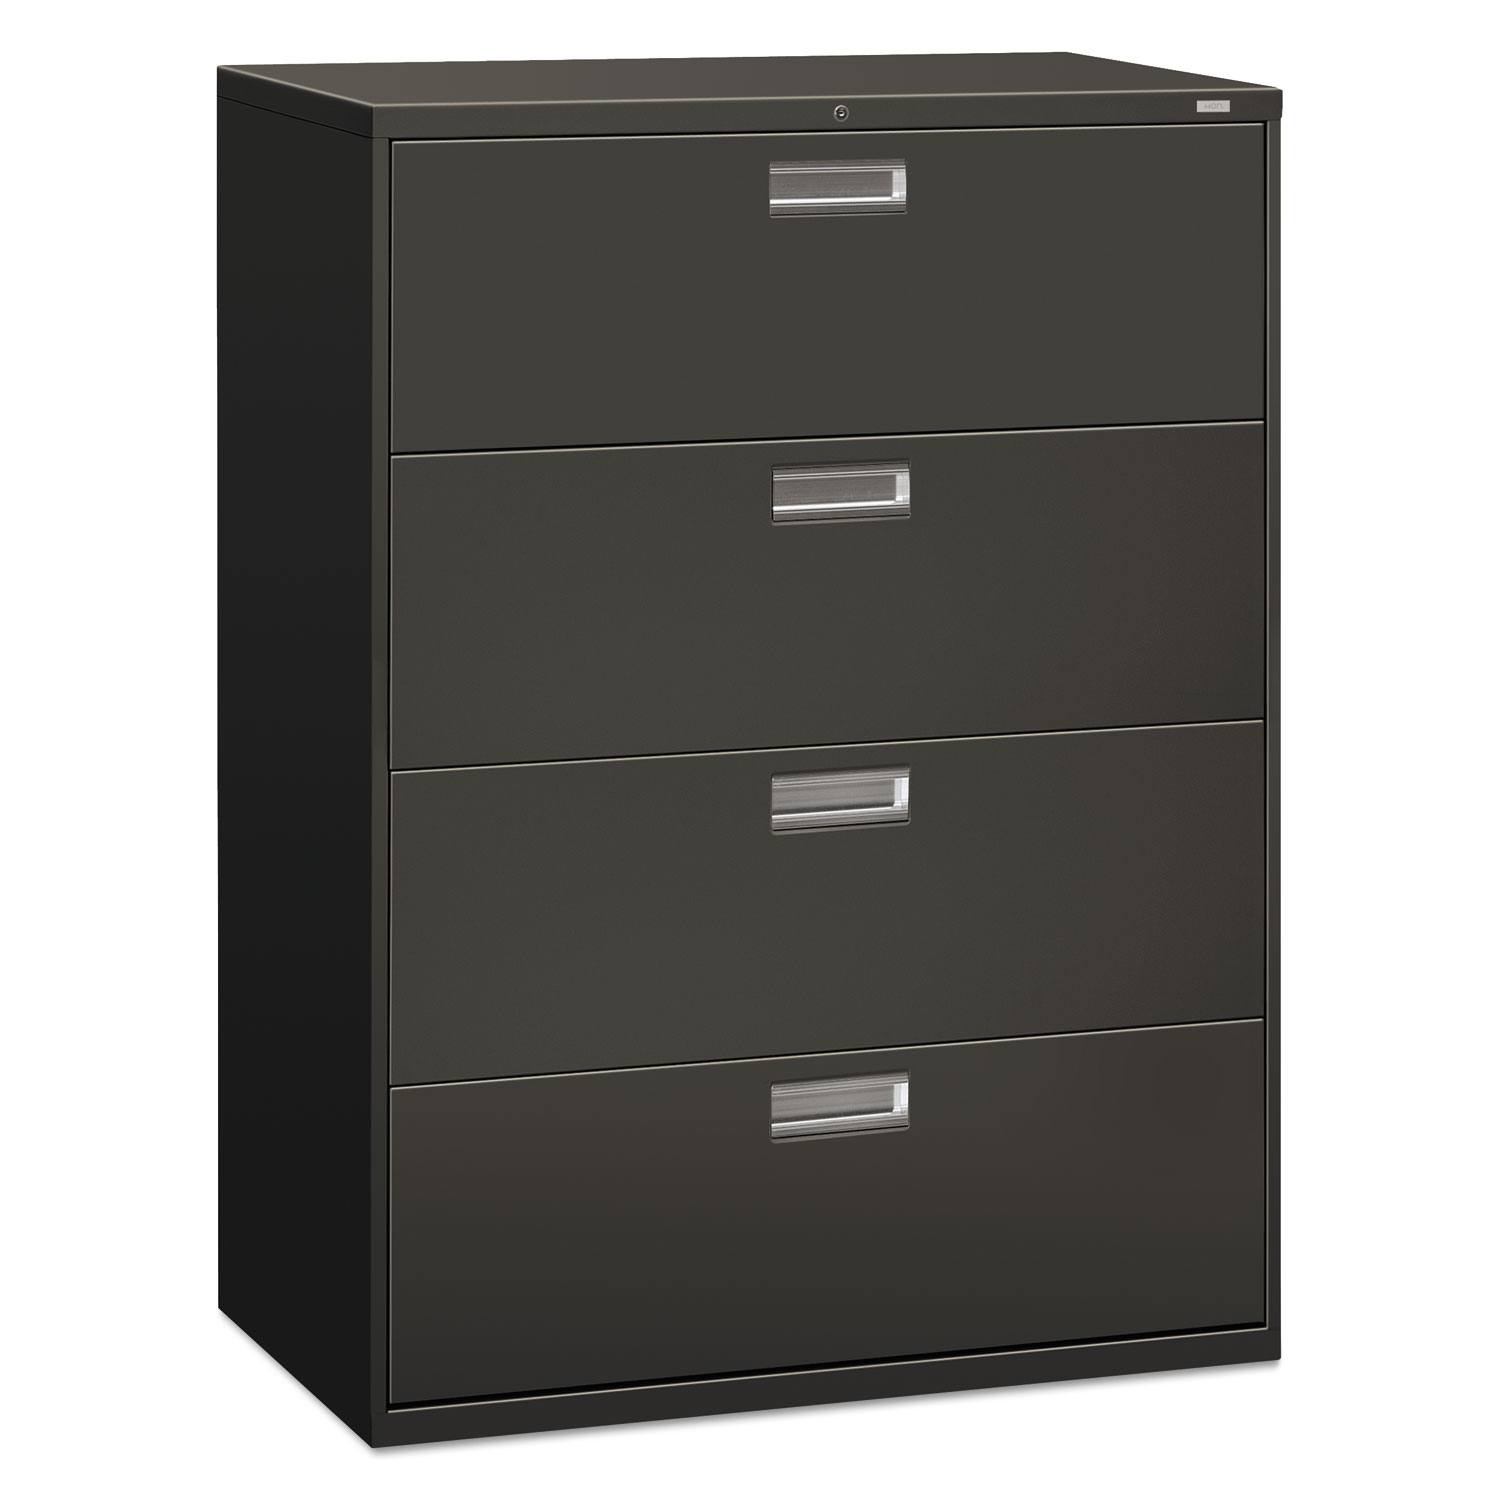  HON H694.L.S 600 Series Four-Drawer Lateral File, 42w x 18d x 52.5h, Charcoal (HON694LS) 